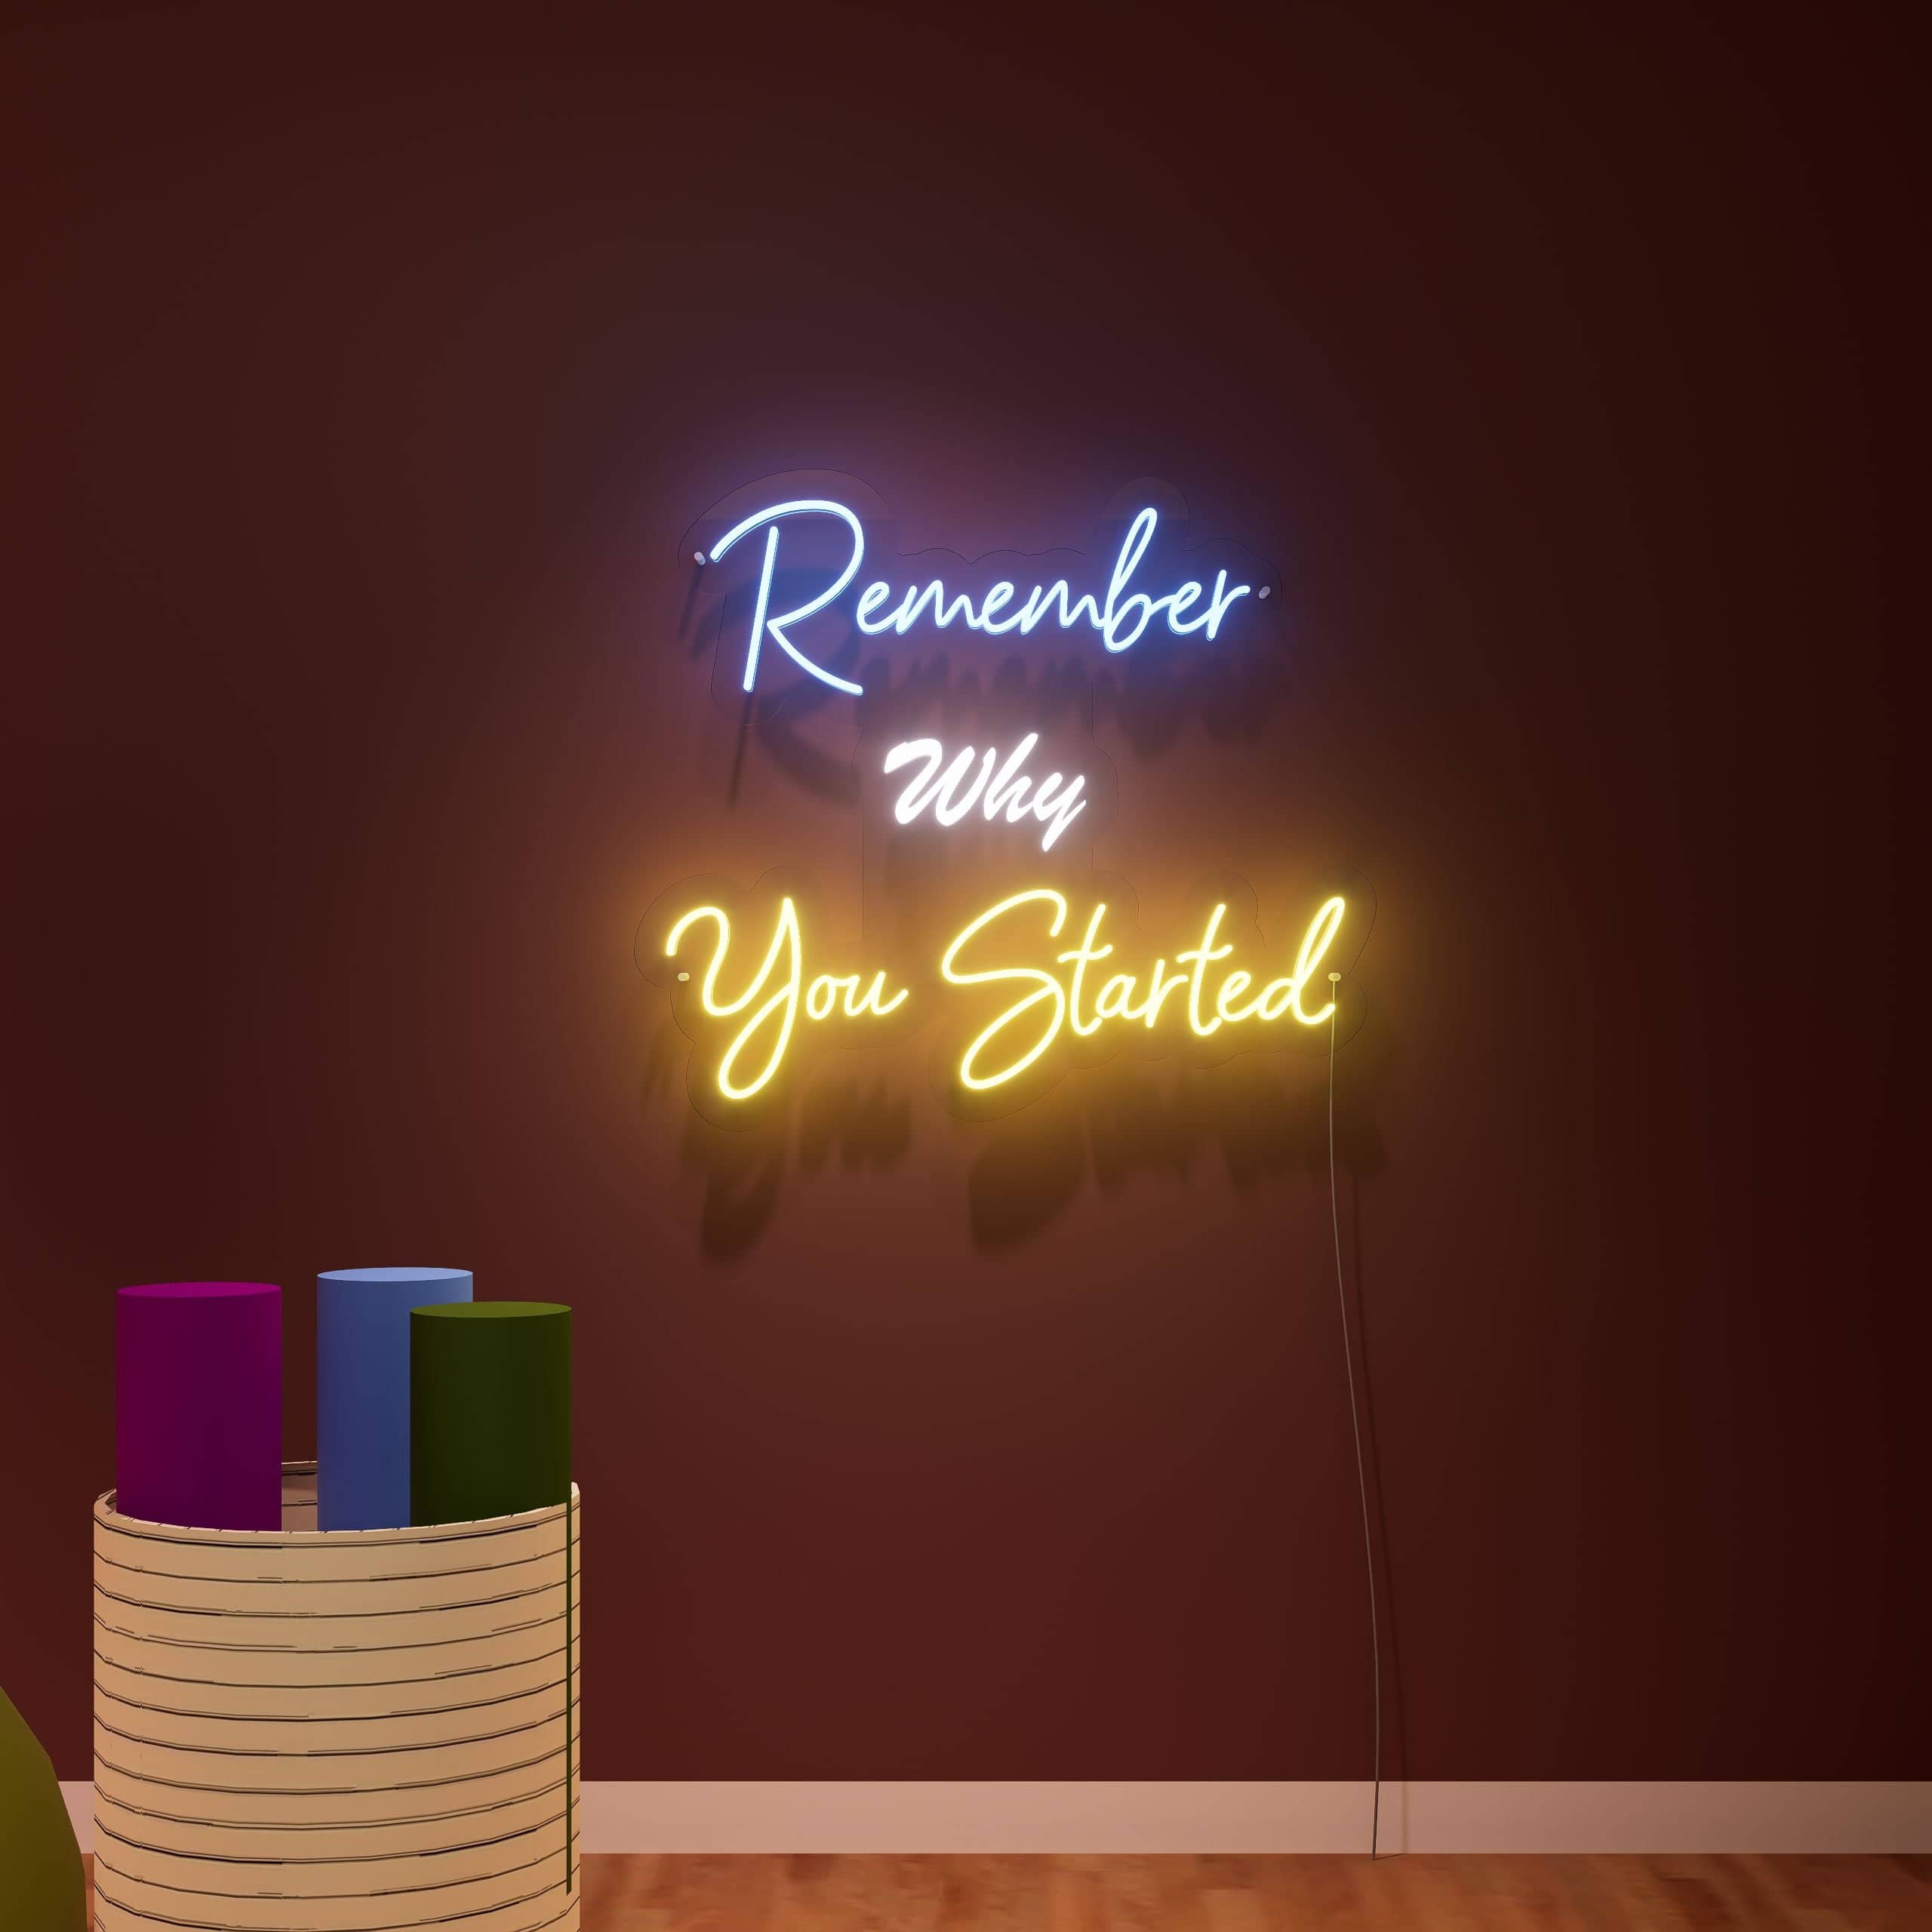 reflect-on-your-purpose-and-beginnings-neon-sign-lite